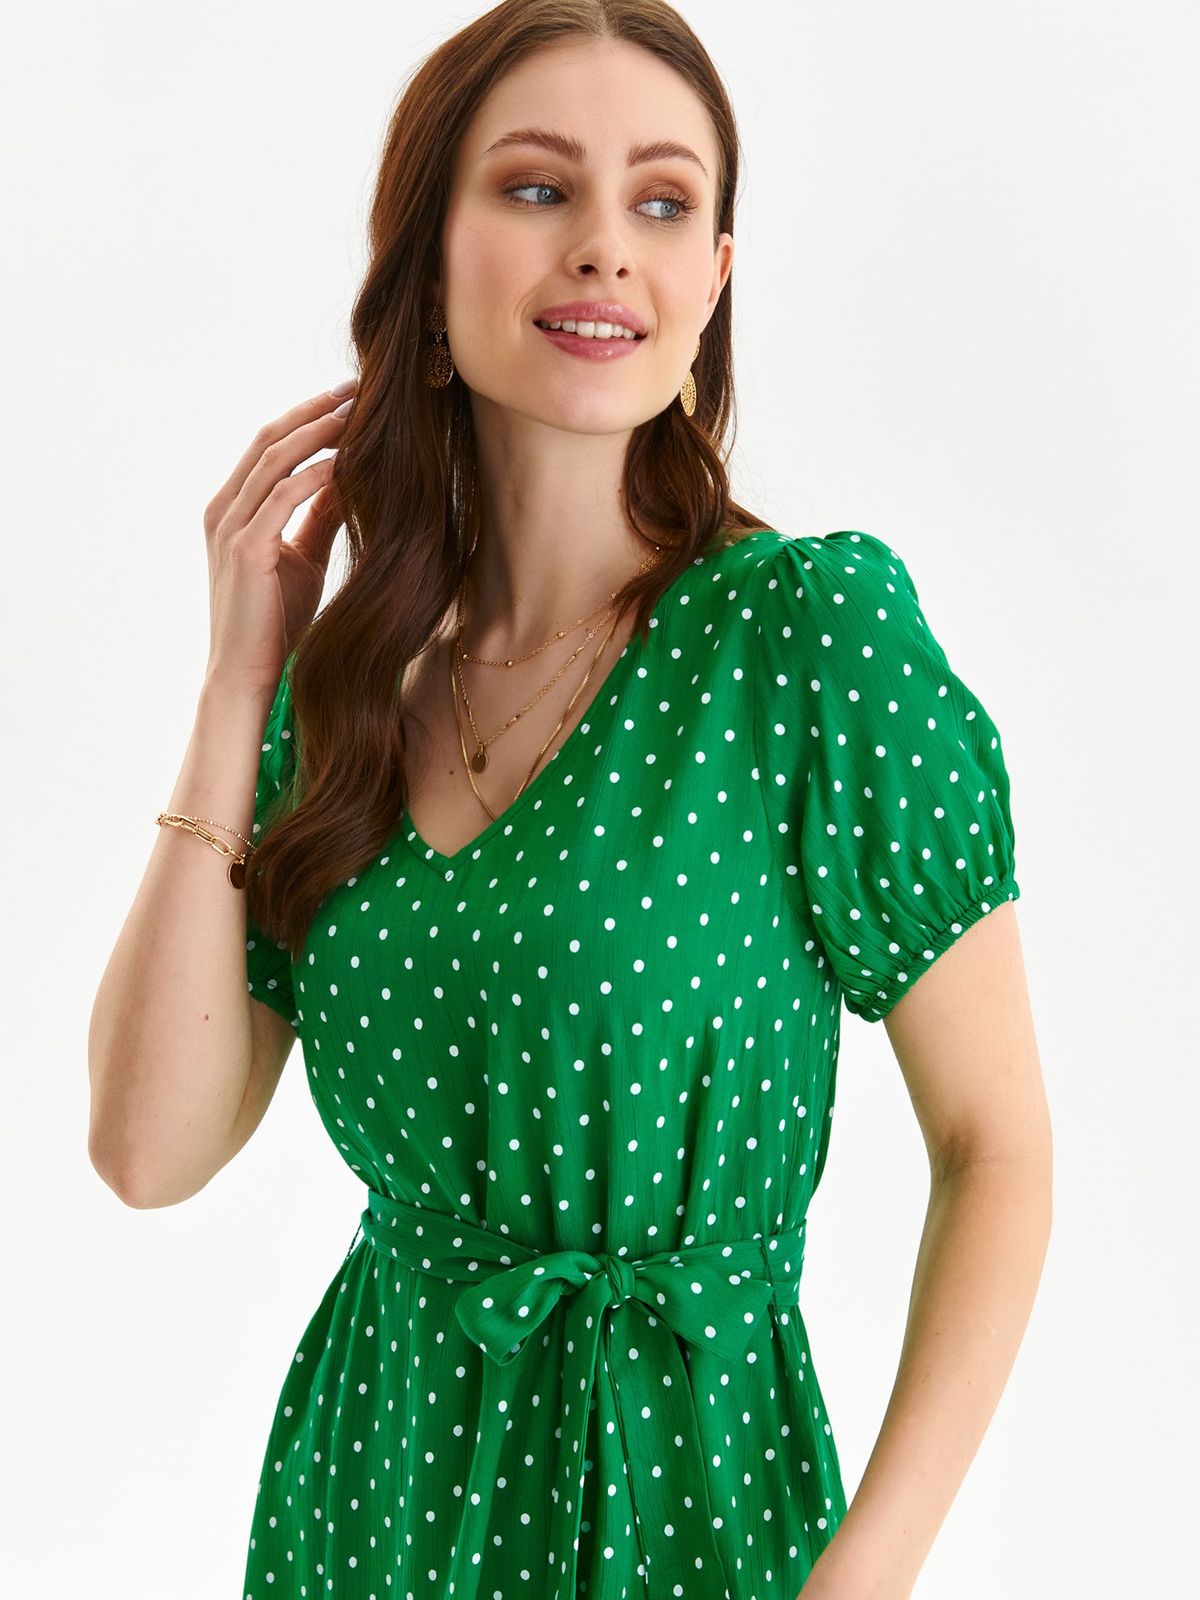 Green dress thin fabric short cut loose fit accessorized with tied waistband with puffed sleeves 4 - StarShinerS.com